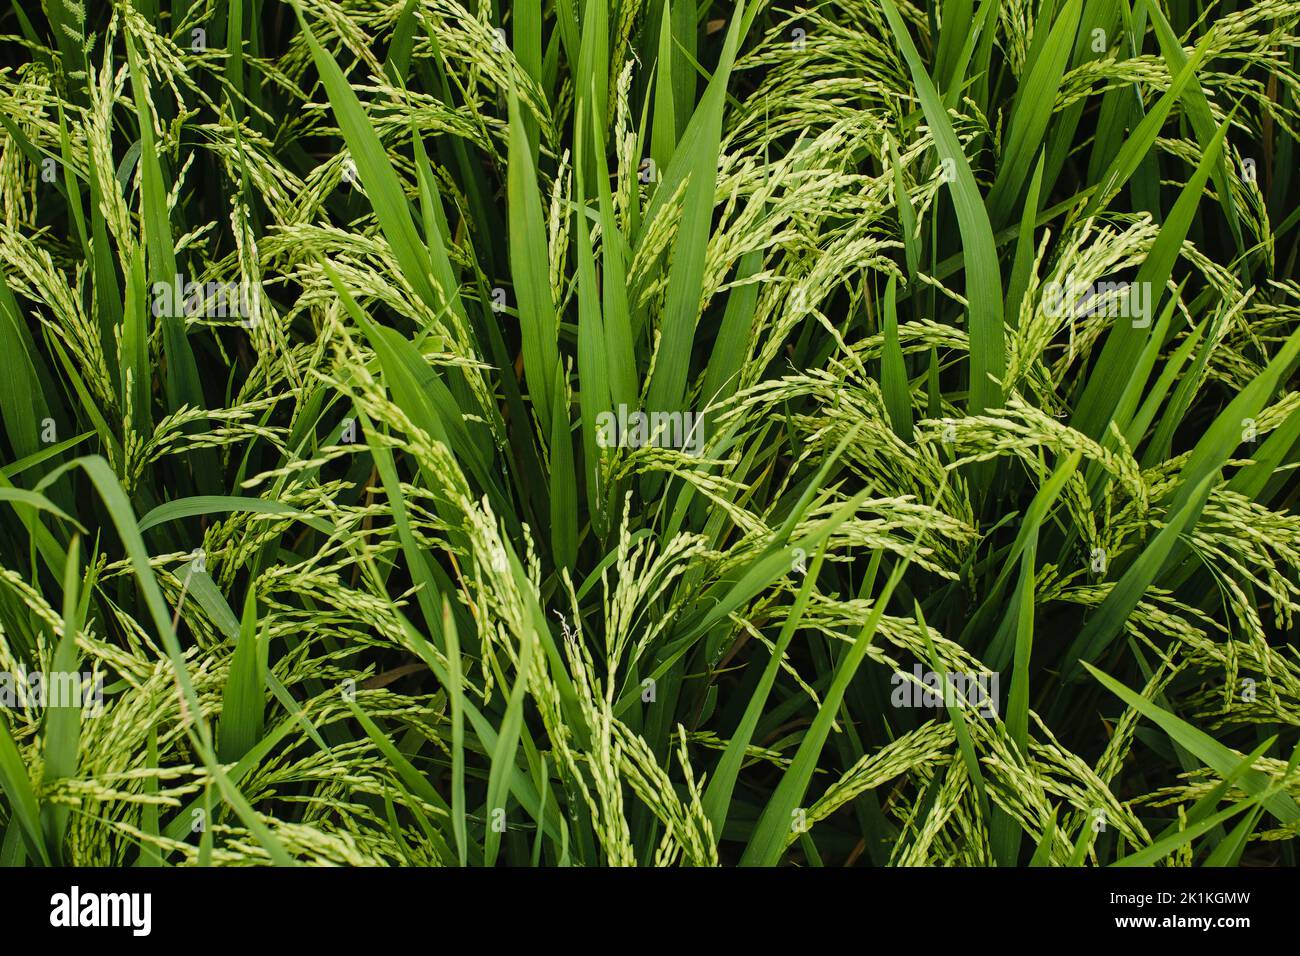 Green rice fields texture of ears close-up. Stock Photo